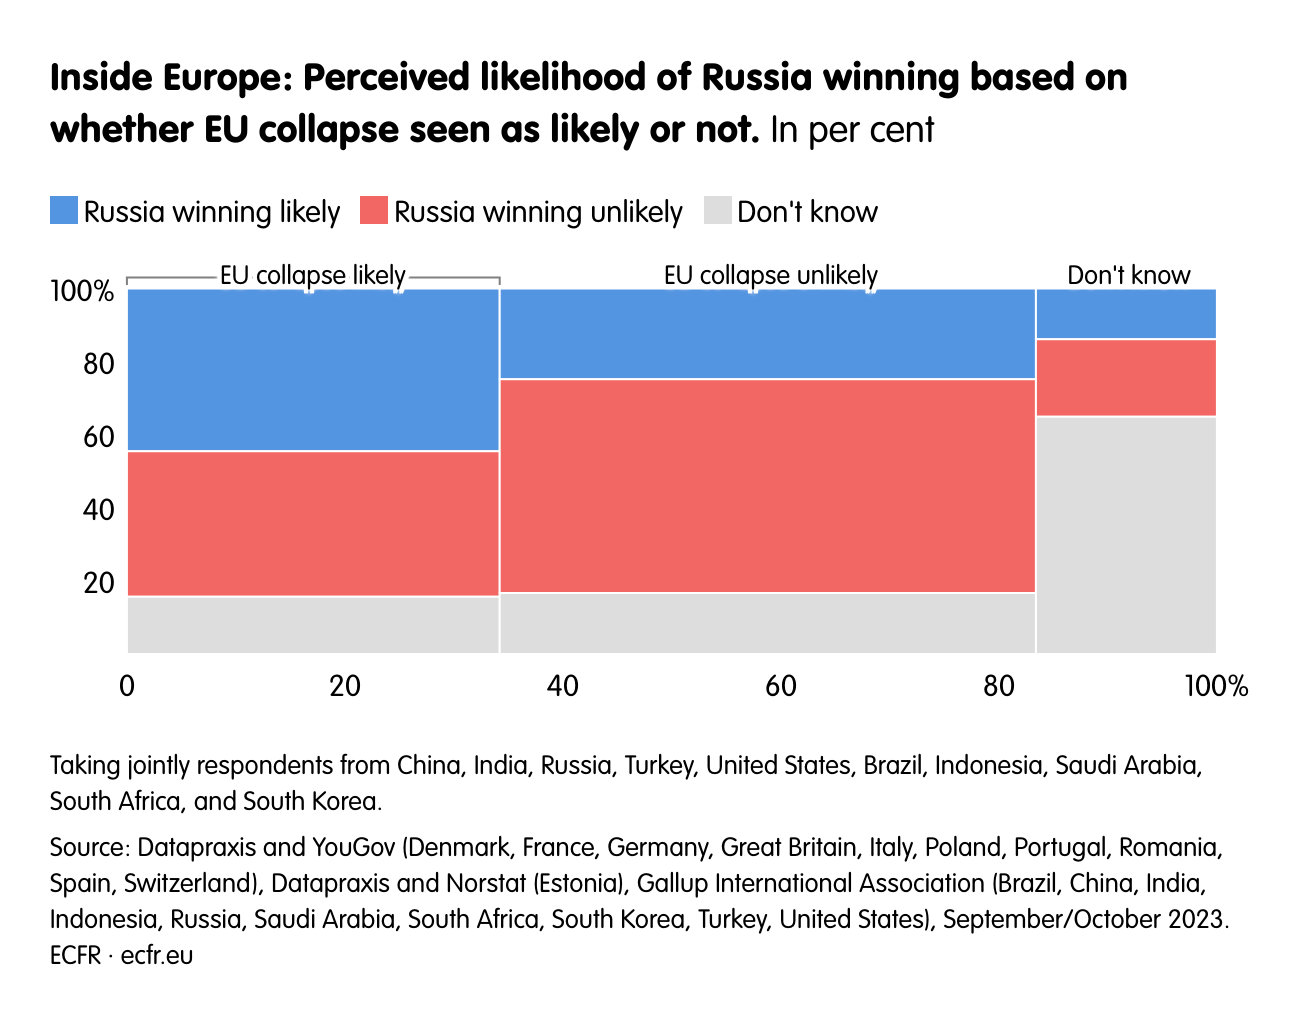 Inside Europe: Perceived likelihood of Russia winning based on whether EU collapse seen as likely or not.